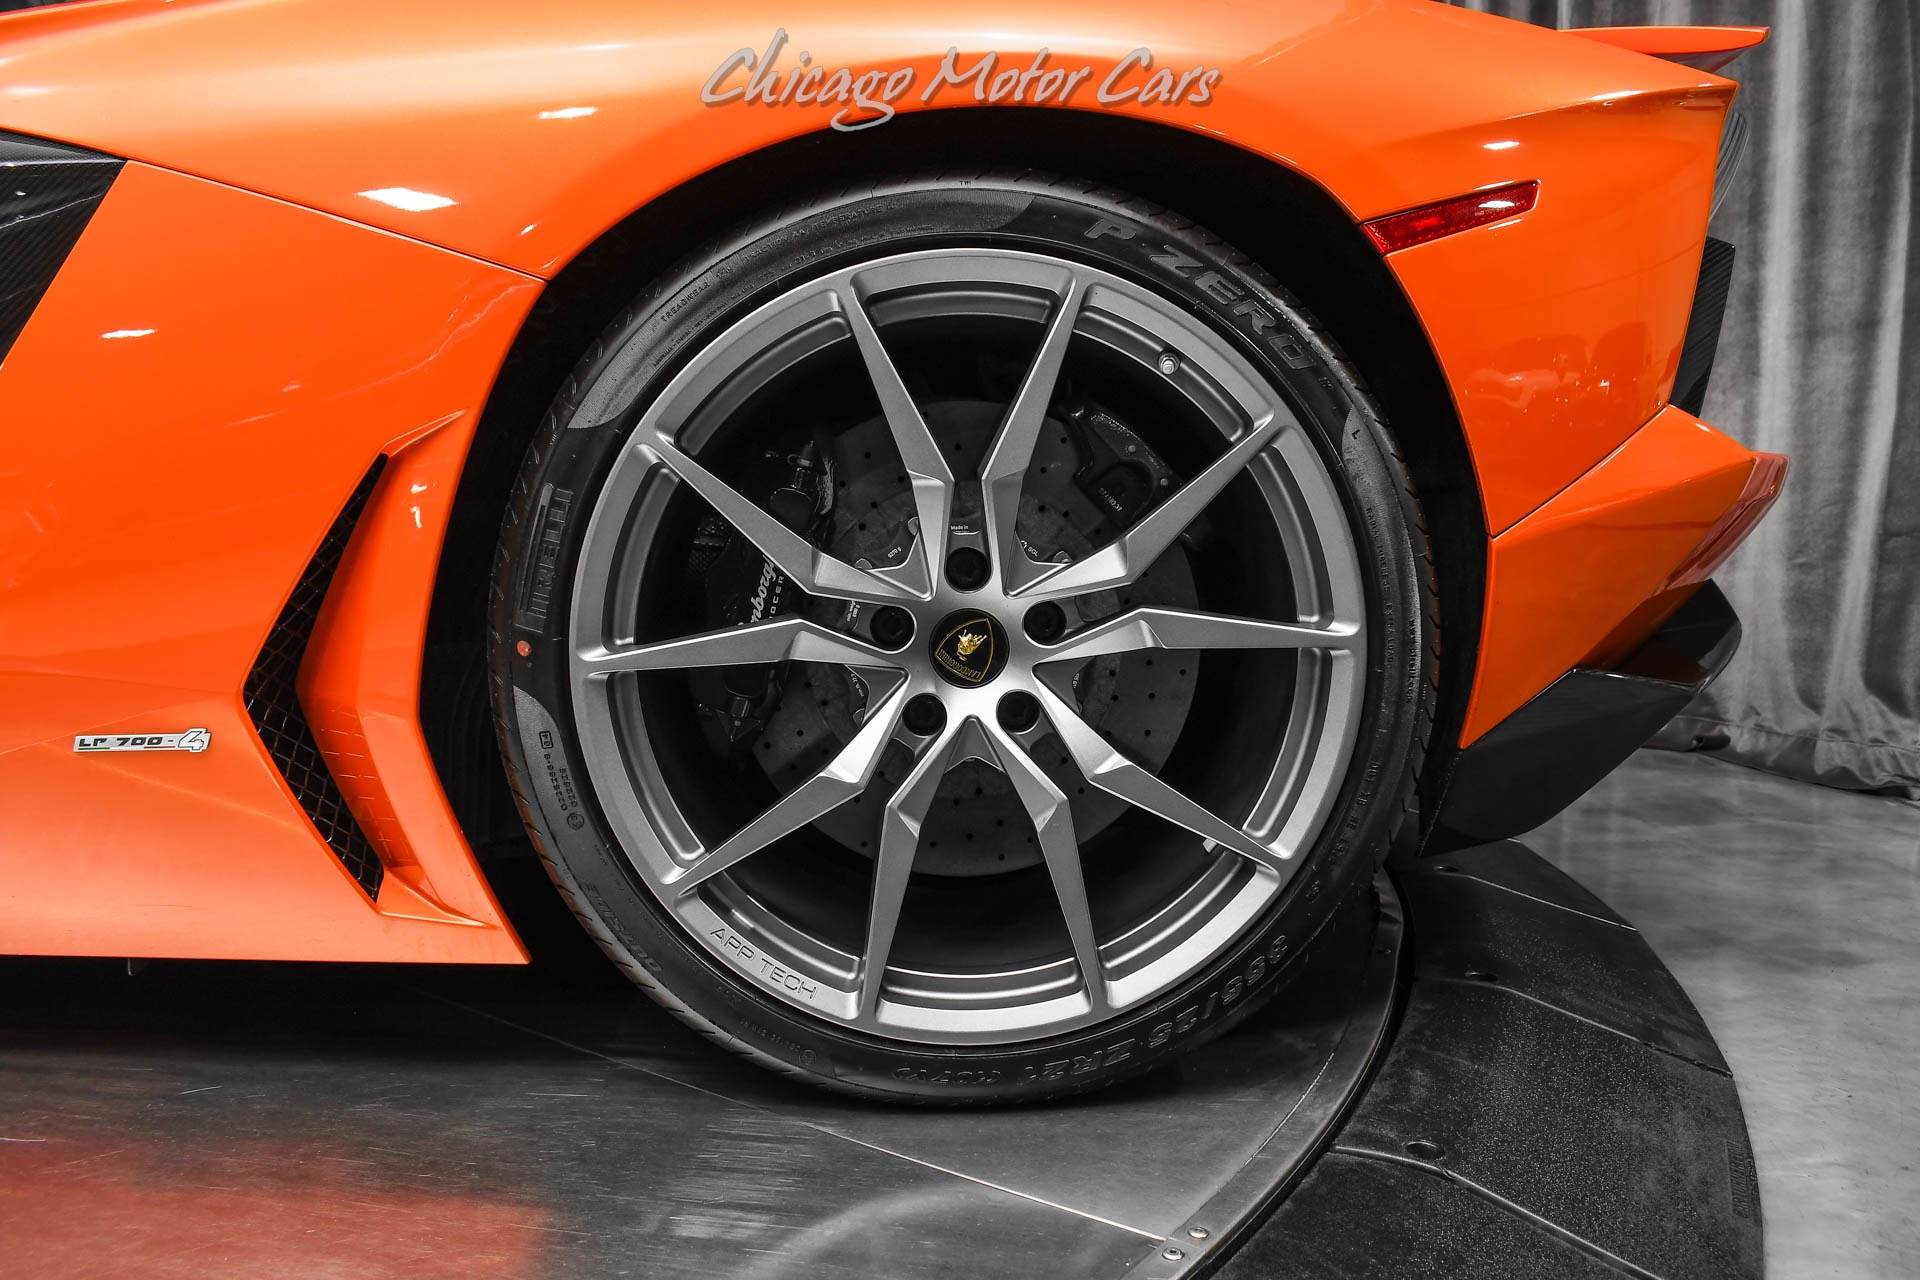 Used-2015-Lamborghini-Aventador-LP700-4-FULL-Front-PPF-Front-Lift-Upgraded-Wheels-Hot-Color-Combo